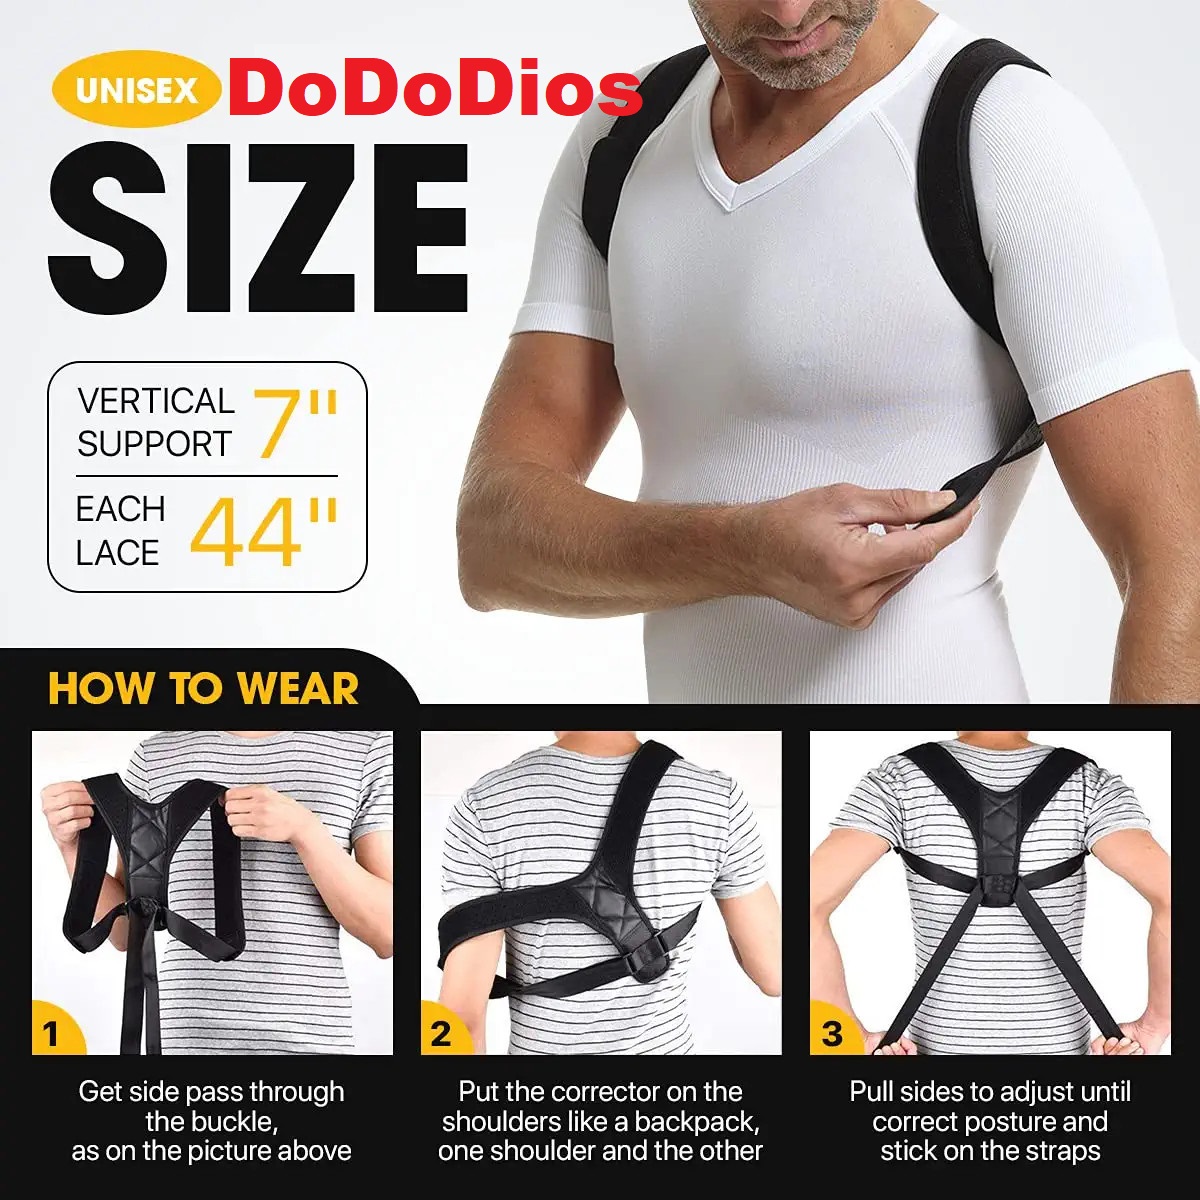 Back Brace Posture Corrector for Women and Men - Adjustable Upper Back Brace Straightener for Posture and Clavicle Support - Upper Spine Support, Providing Pain Relief From Neck, Upper Back Corrector and Shoulder (25-50") - dododios đai chống gù lưng